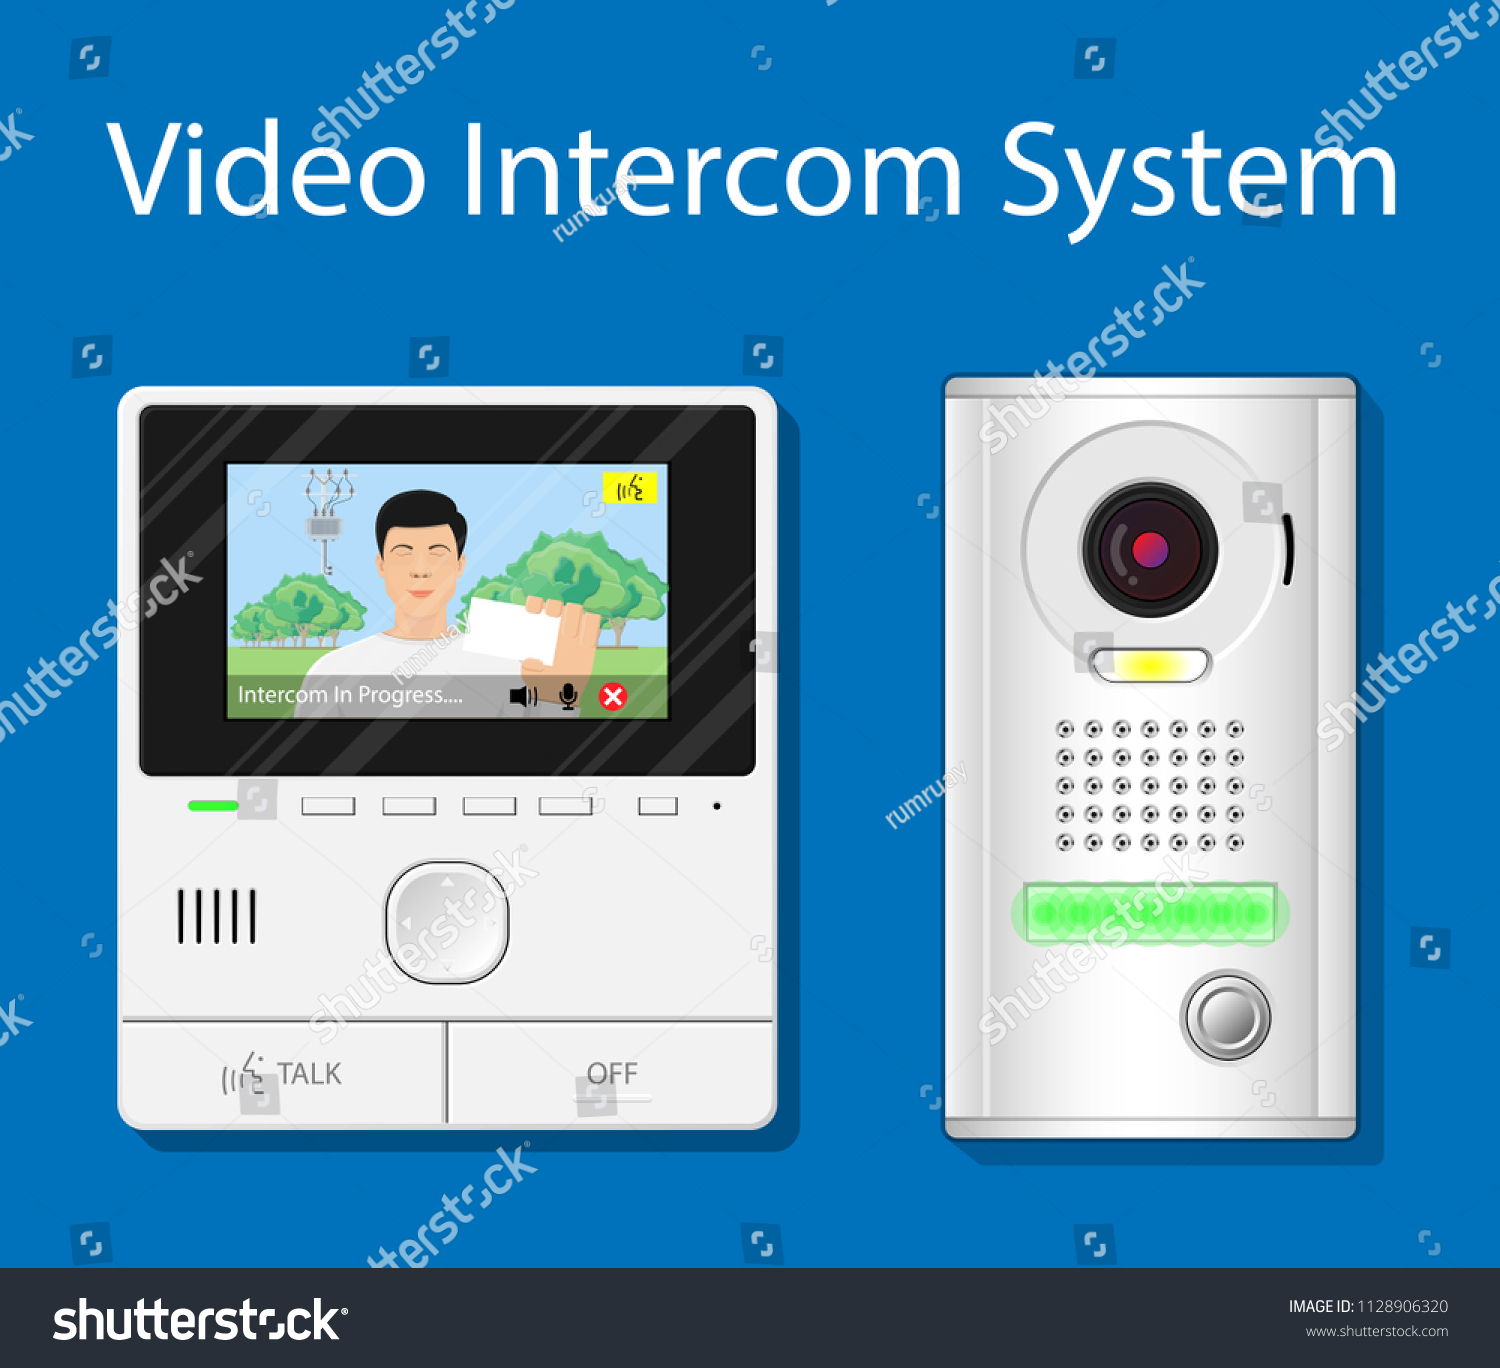 Intercom Systems For Your Home, Is It Time To Upgrade?   GoKeyless    GoKeyless